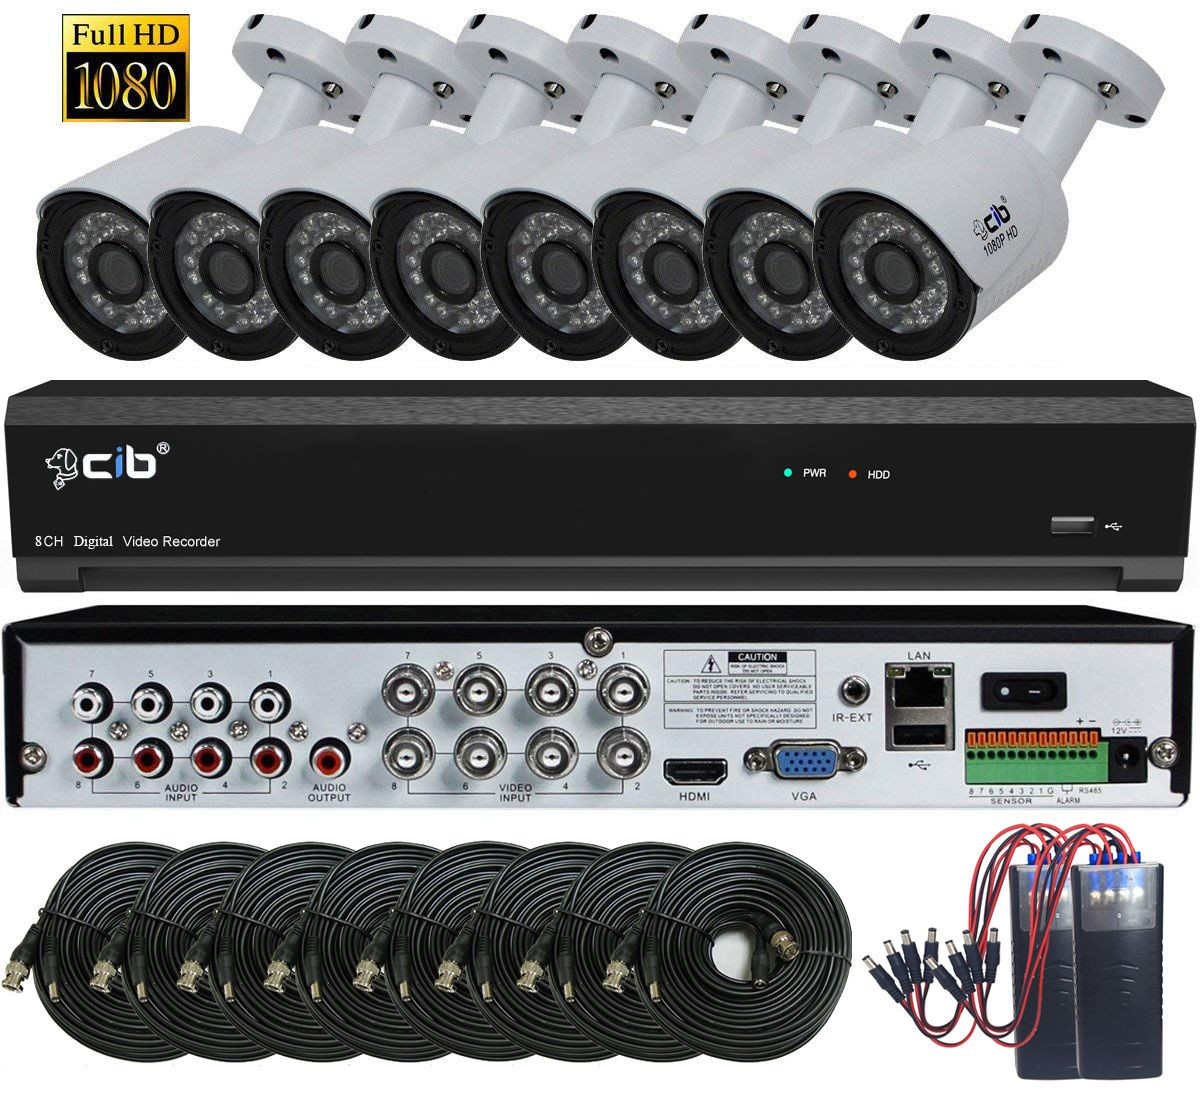 True Full Hybrid 8CH 5M DVR Security System with 8x5-Megapixel Bullet Color  Camera Network Remote Viewing - CIB Security Inc